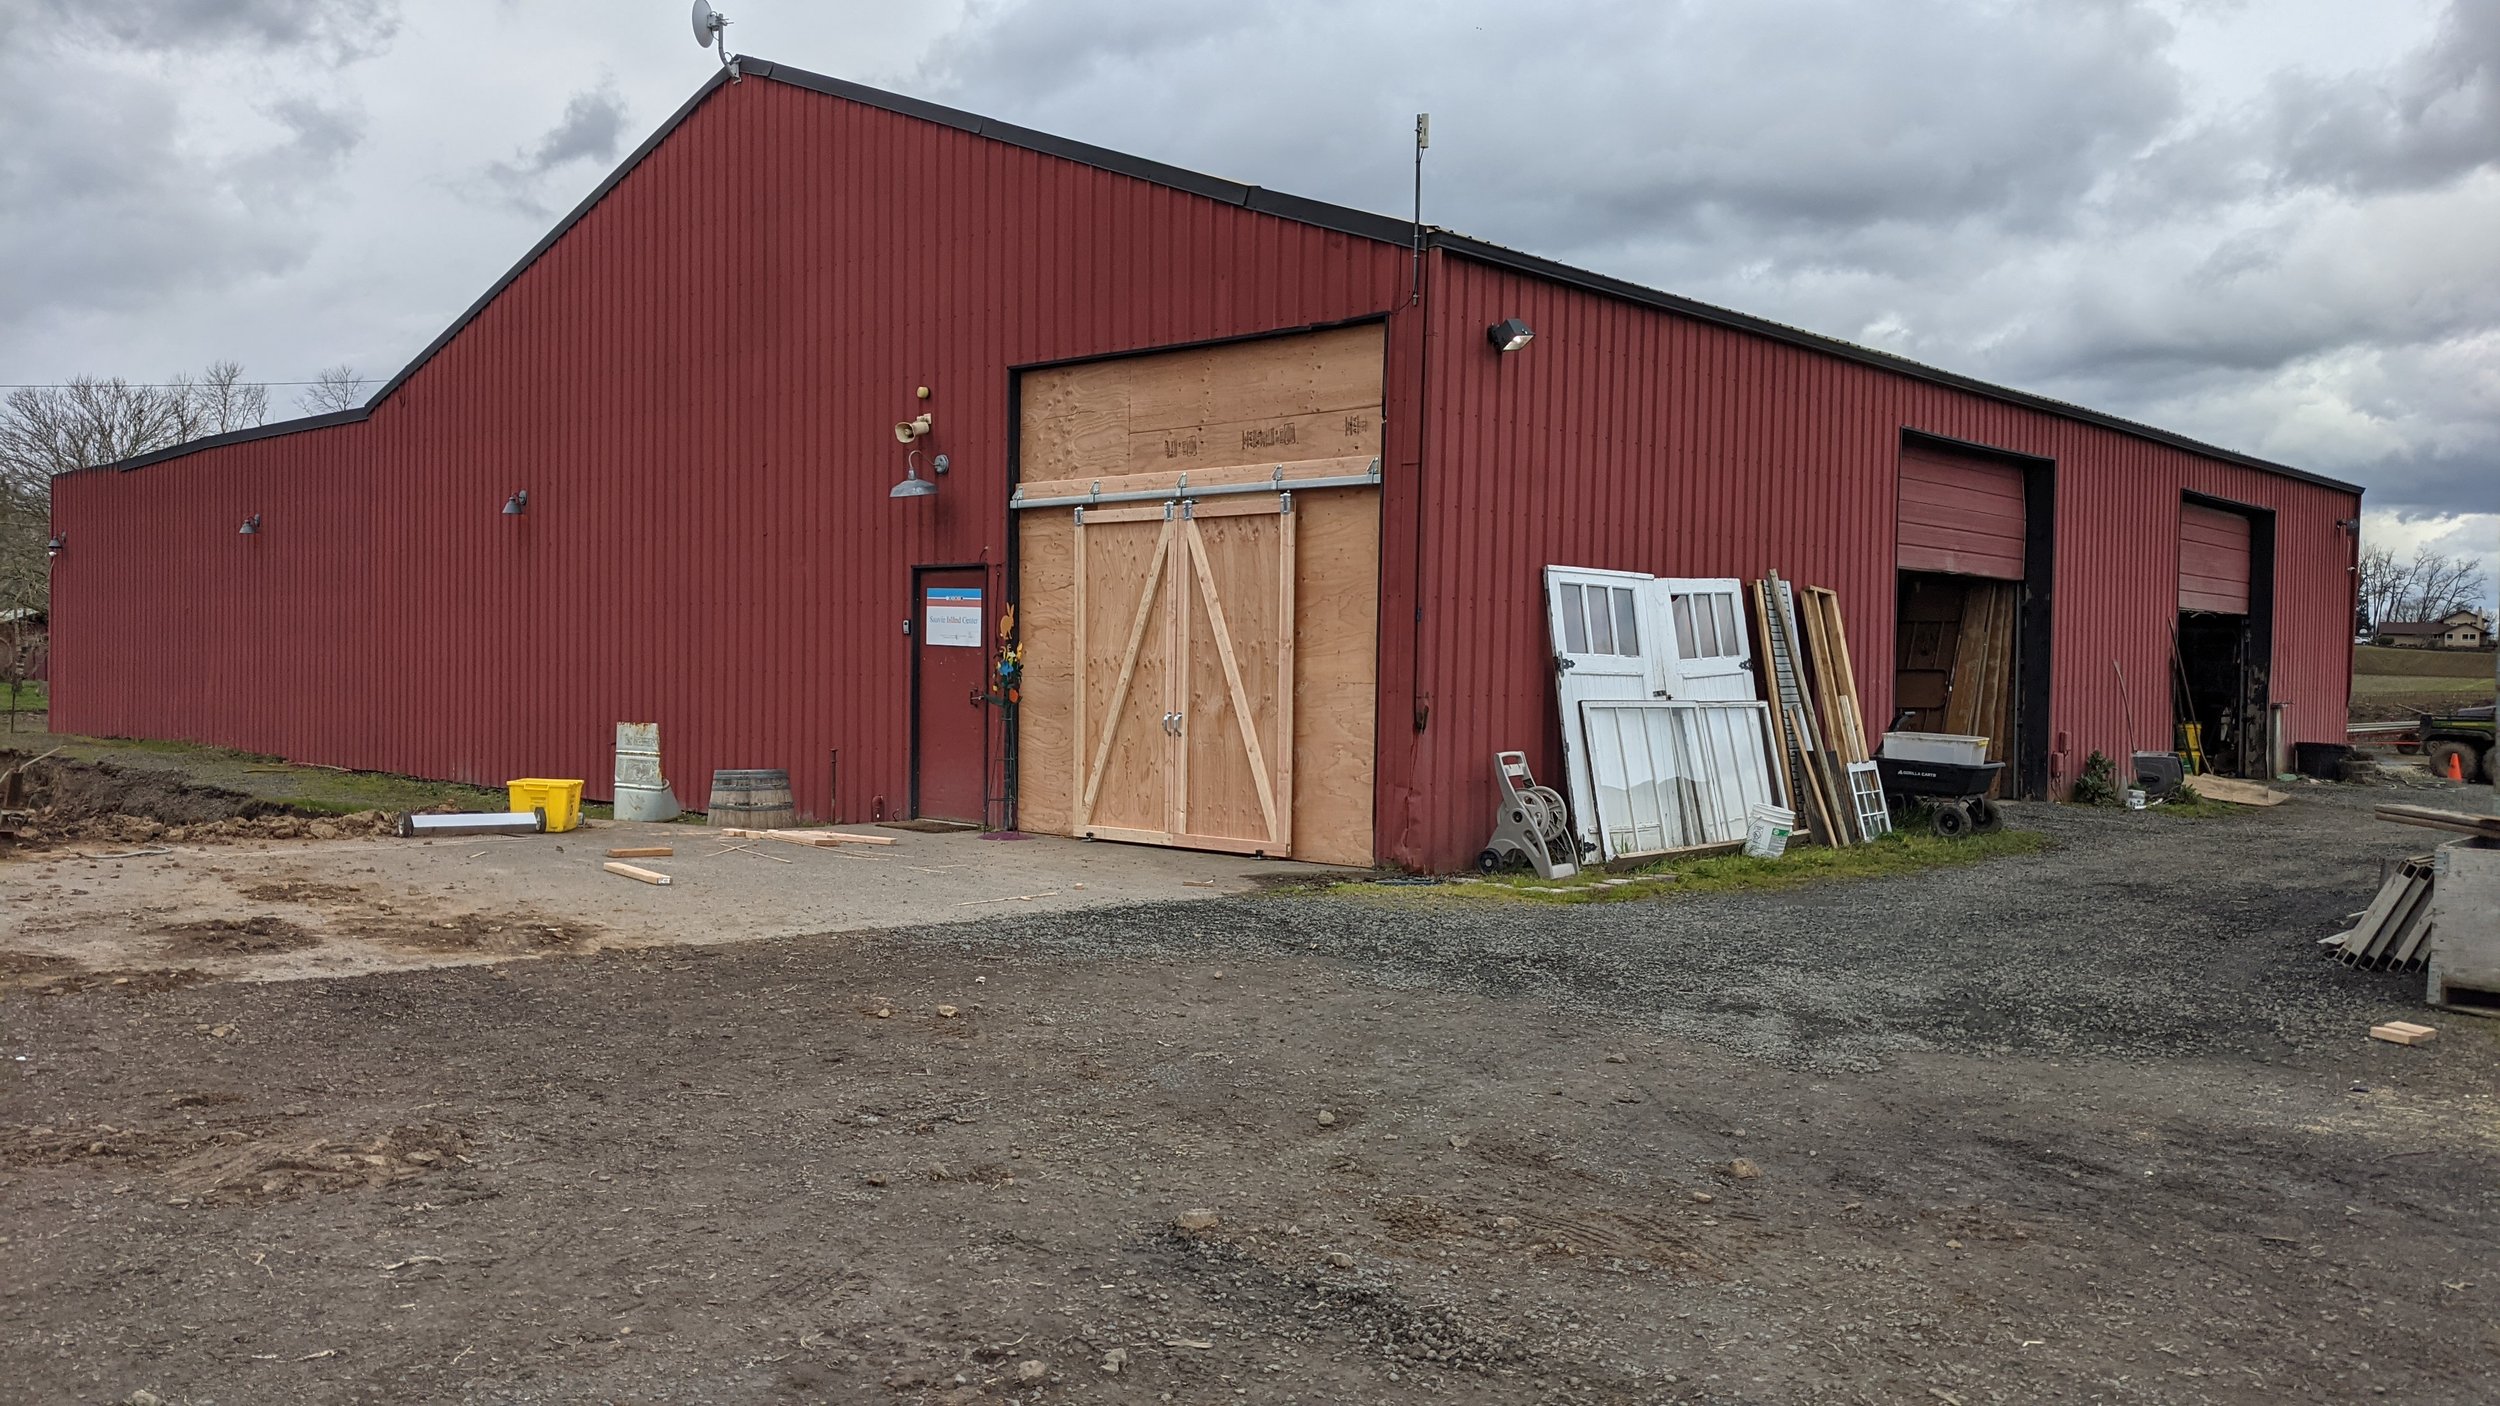  A new entrance for the Sauvie Island Center’s storage, one of the many off-season projects on the farm completed by Kat’s brother, Peter. 